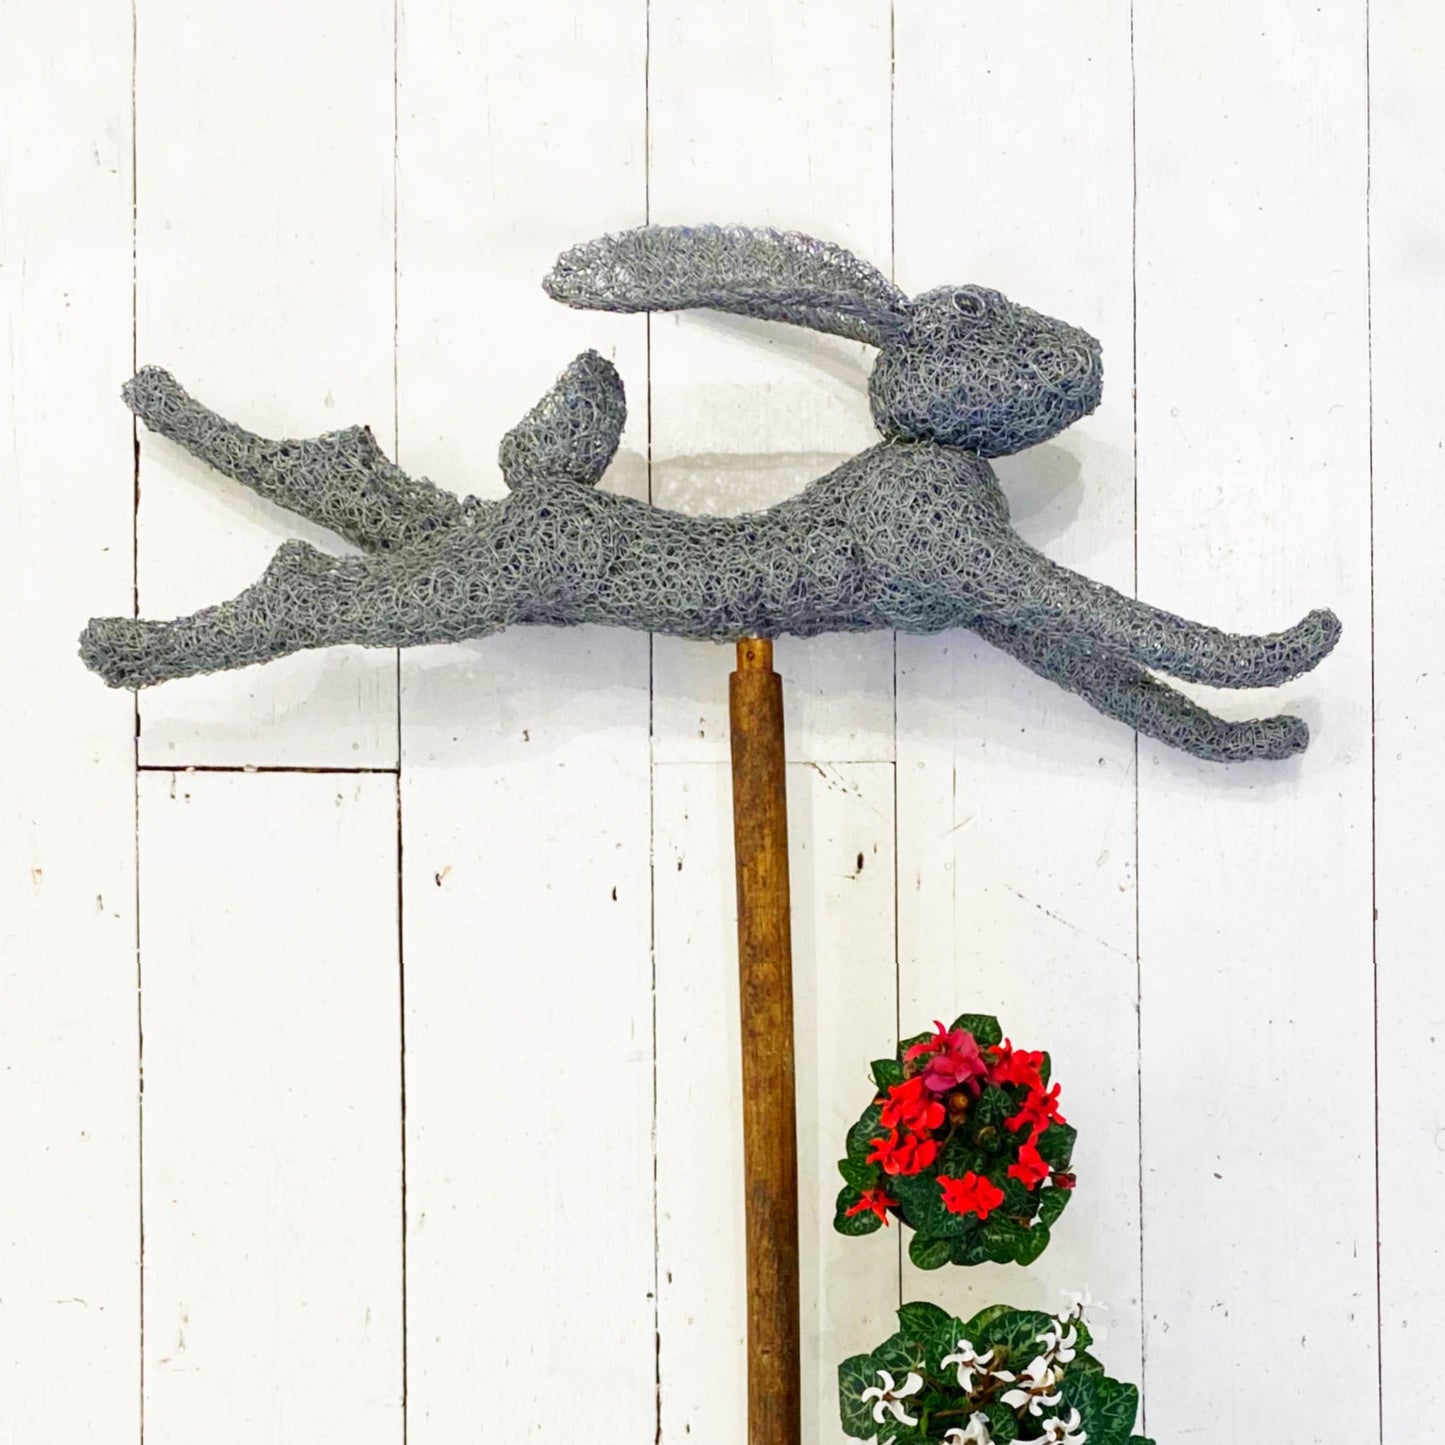 David Metcalff || HandMade Leaping Hare || Mounted on Reclaimed Tool